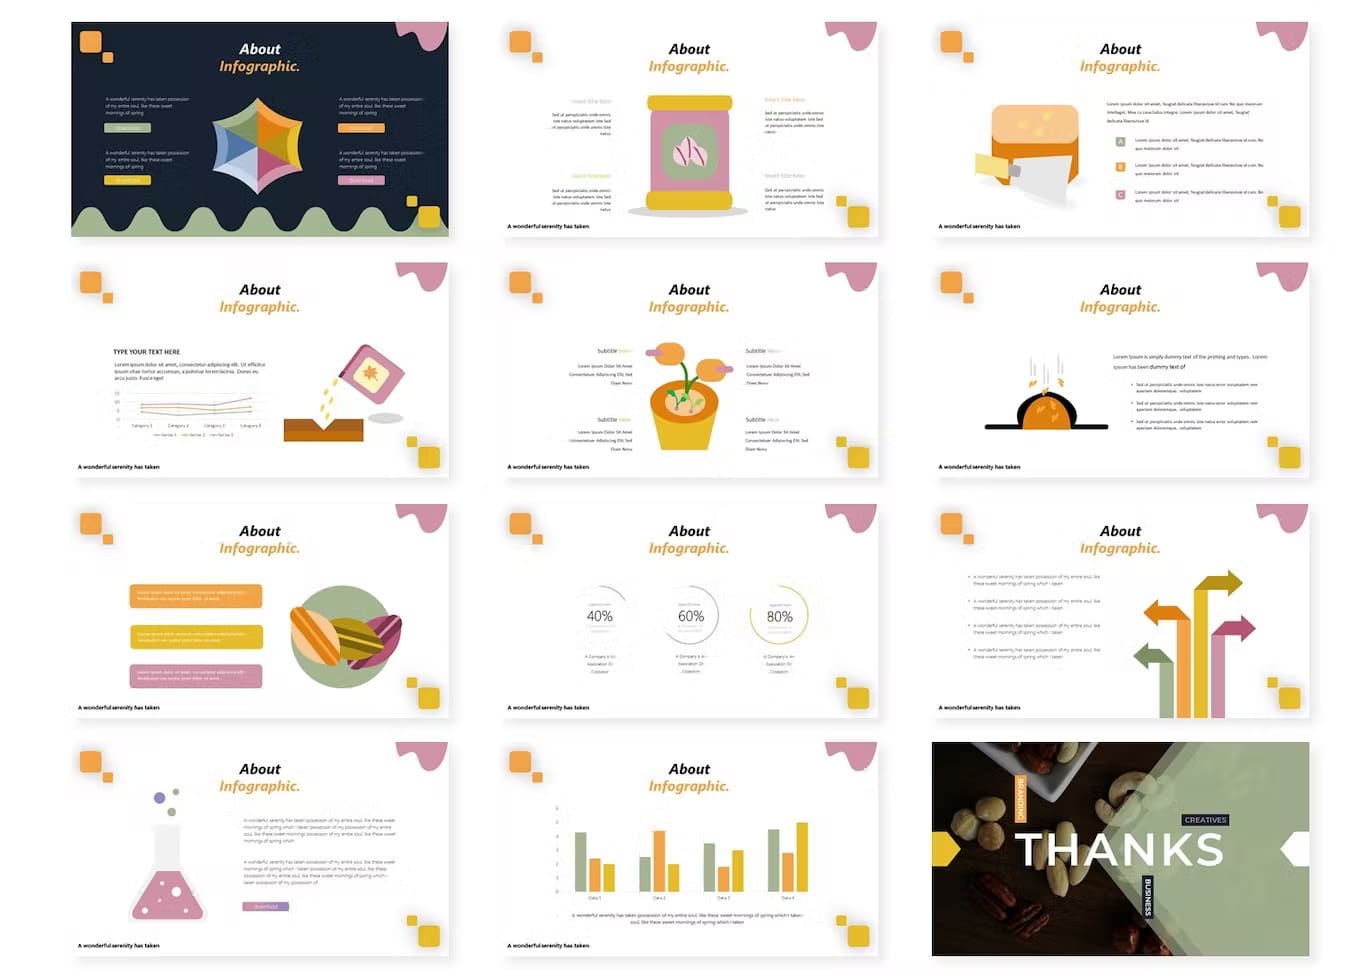 About Infographic of Itseeds keynote template.